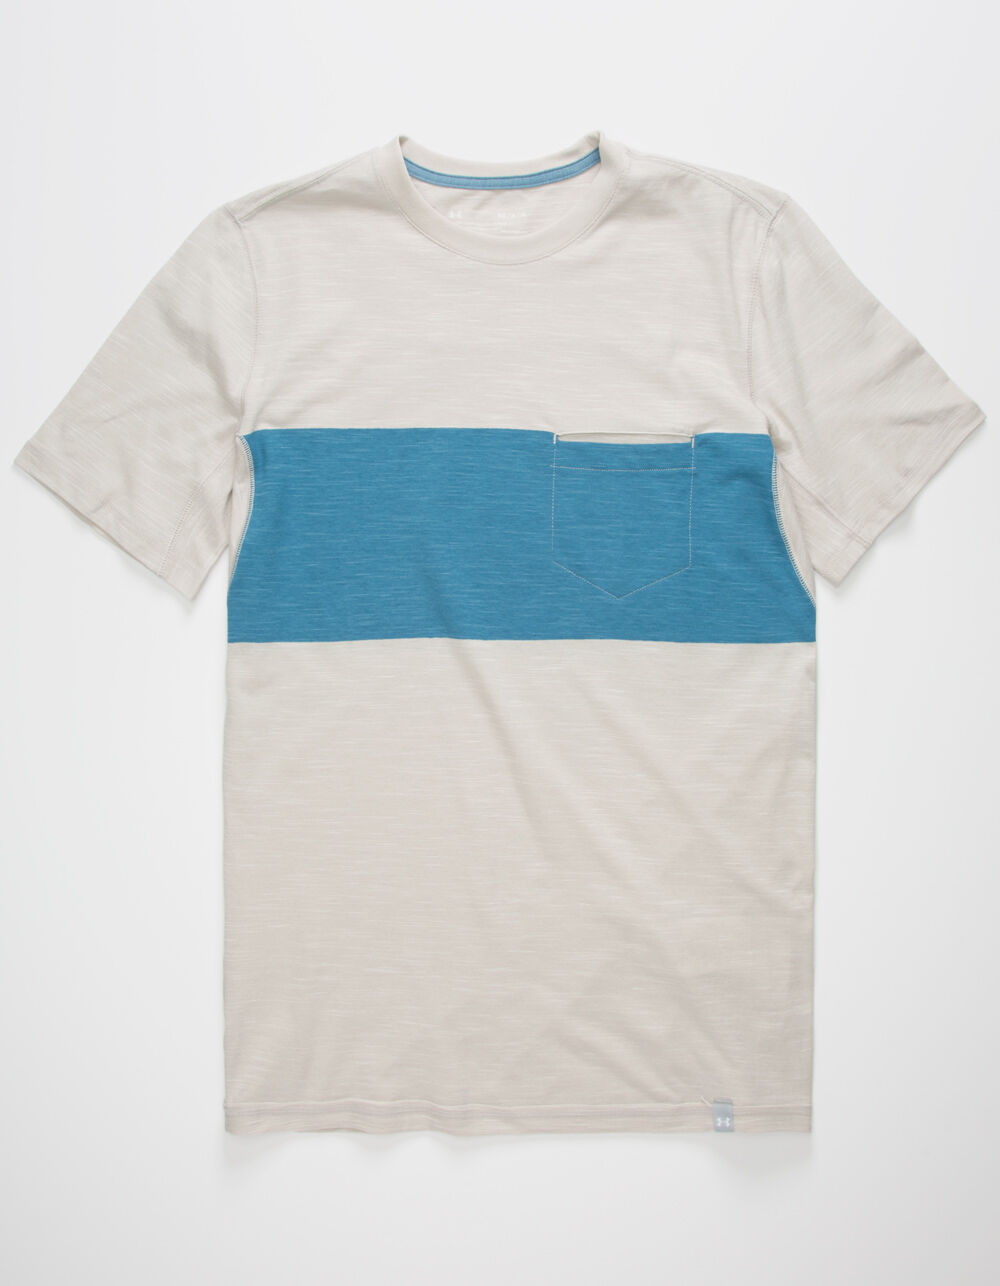 UNDER ARMOUR Lifestyle Mens Pocket Tee image number 0